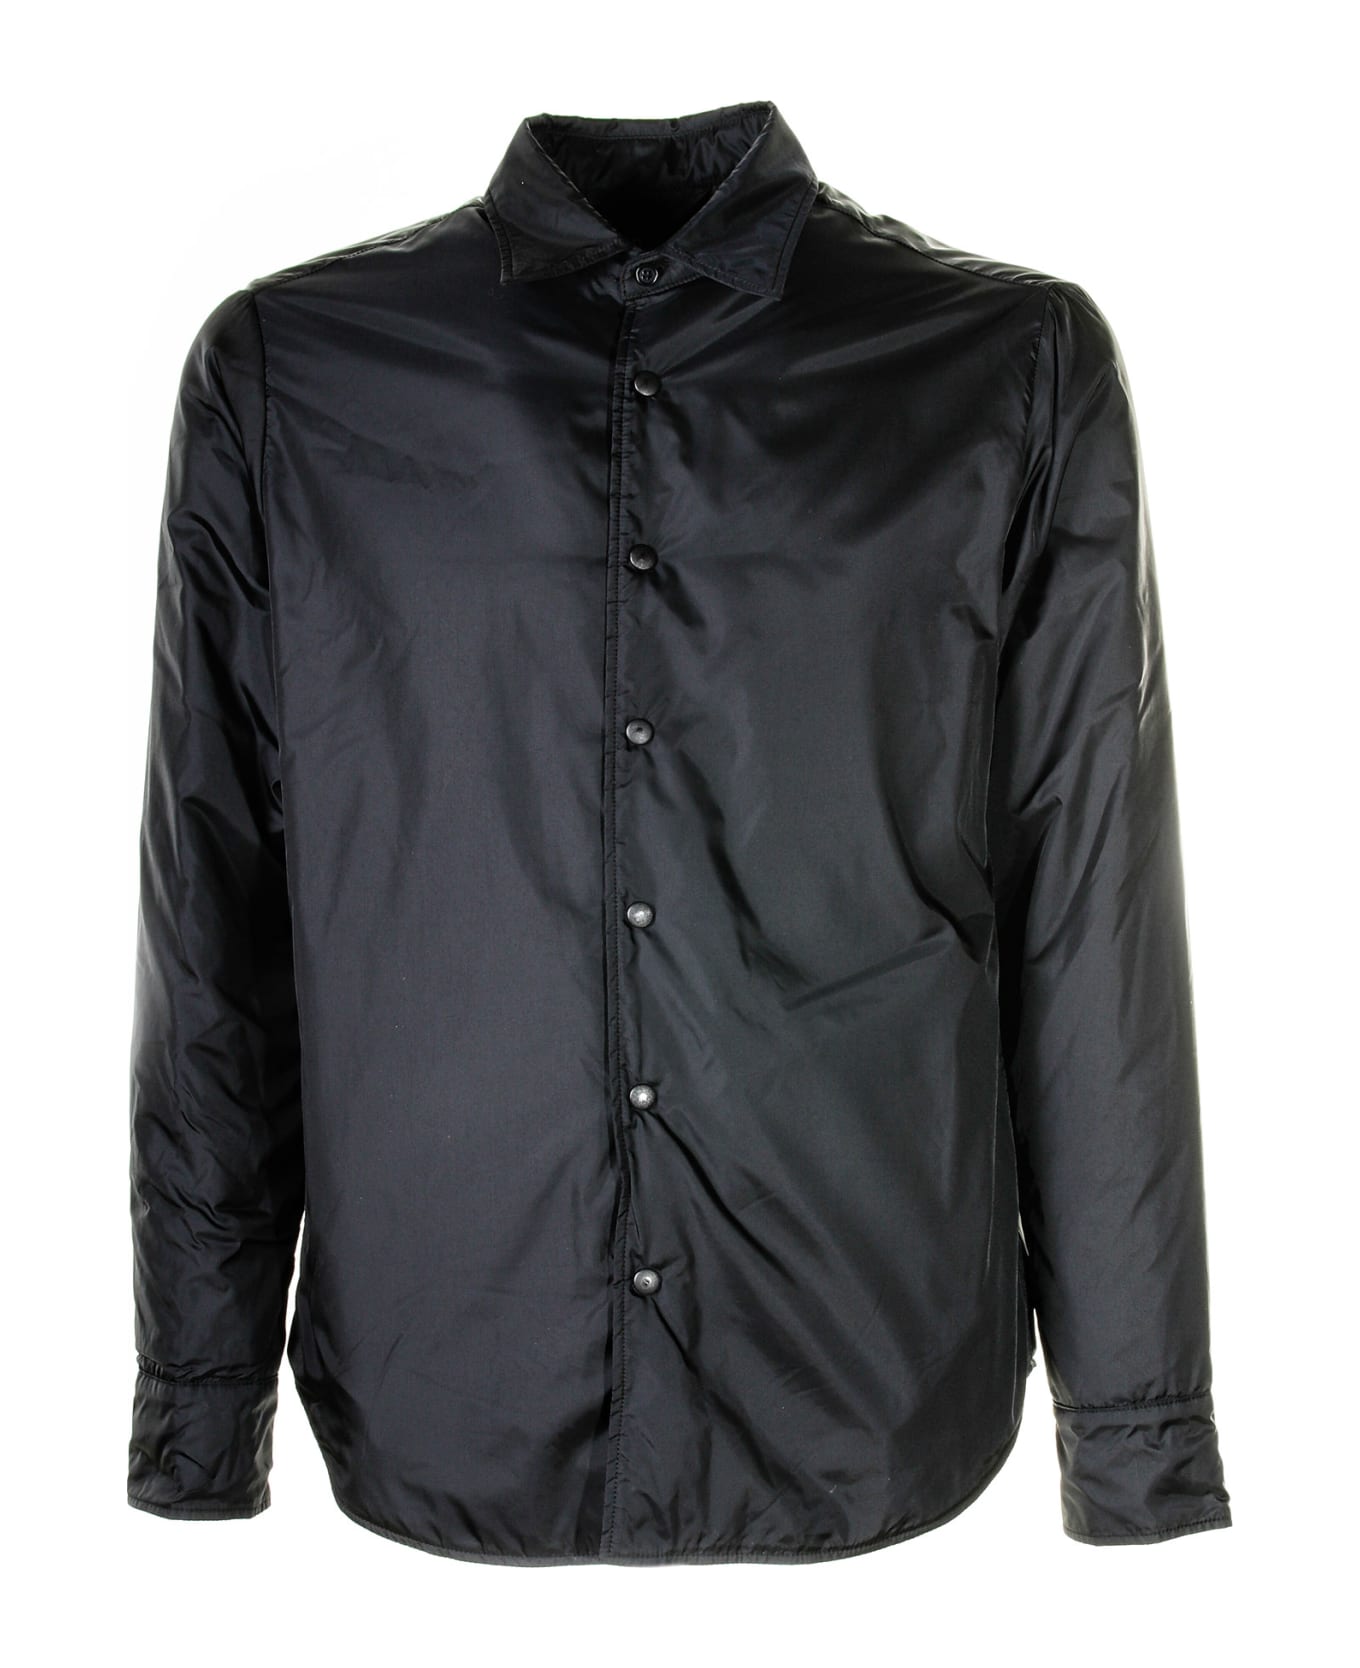 Aspesi Shirt Jacket With Buttons - BLACK NERO シャツ